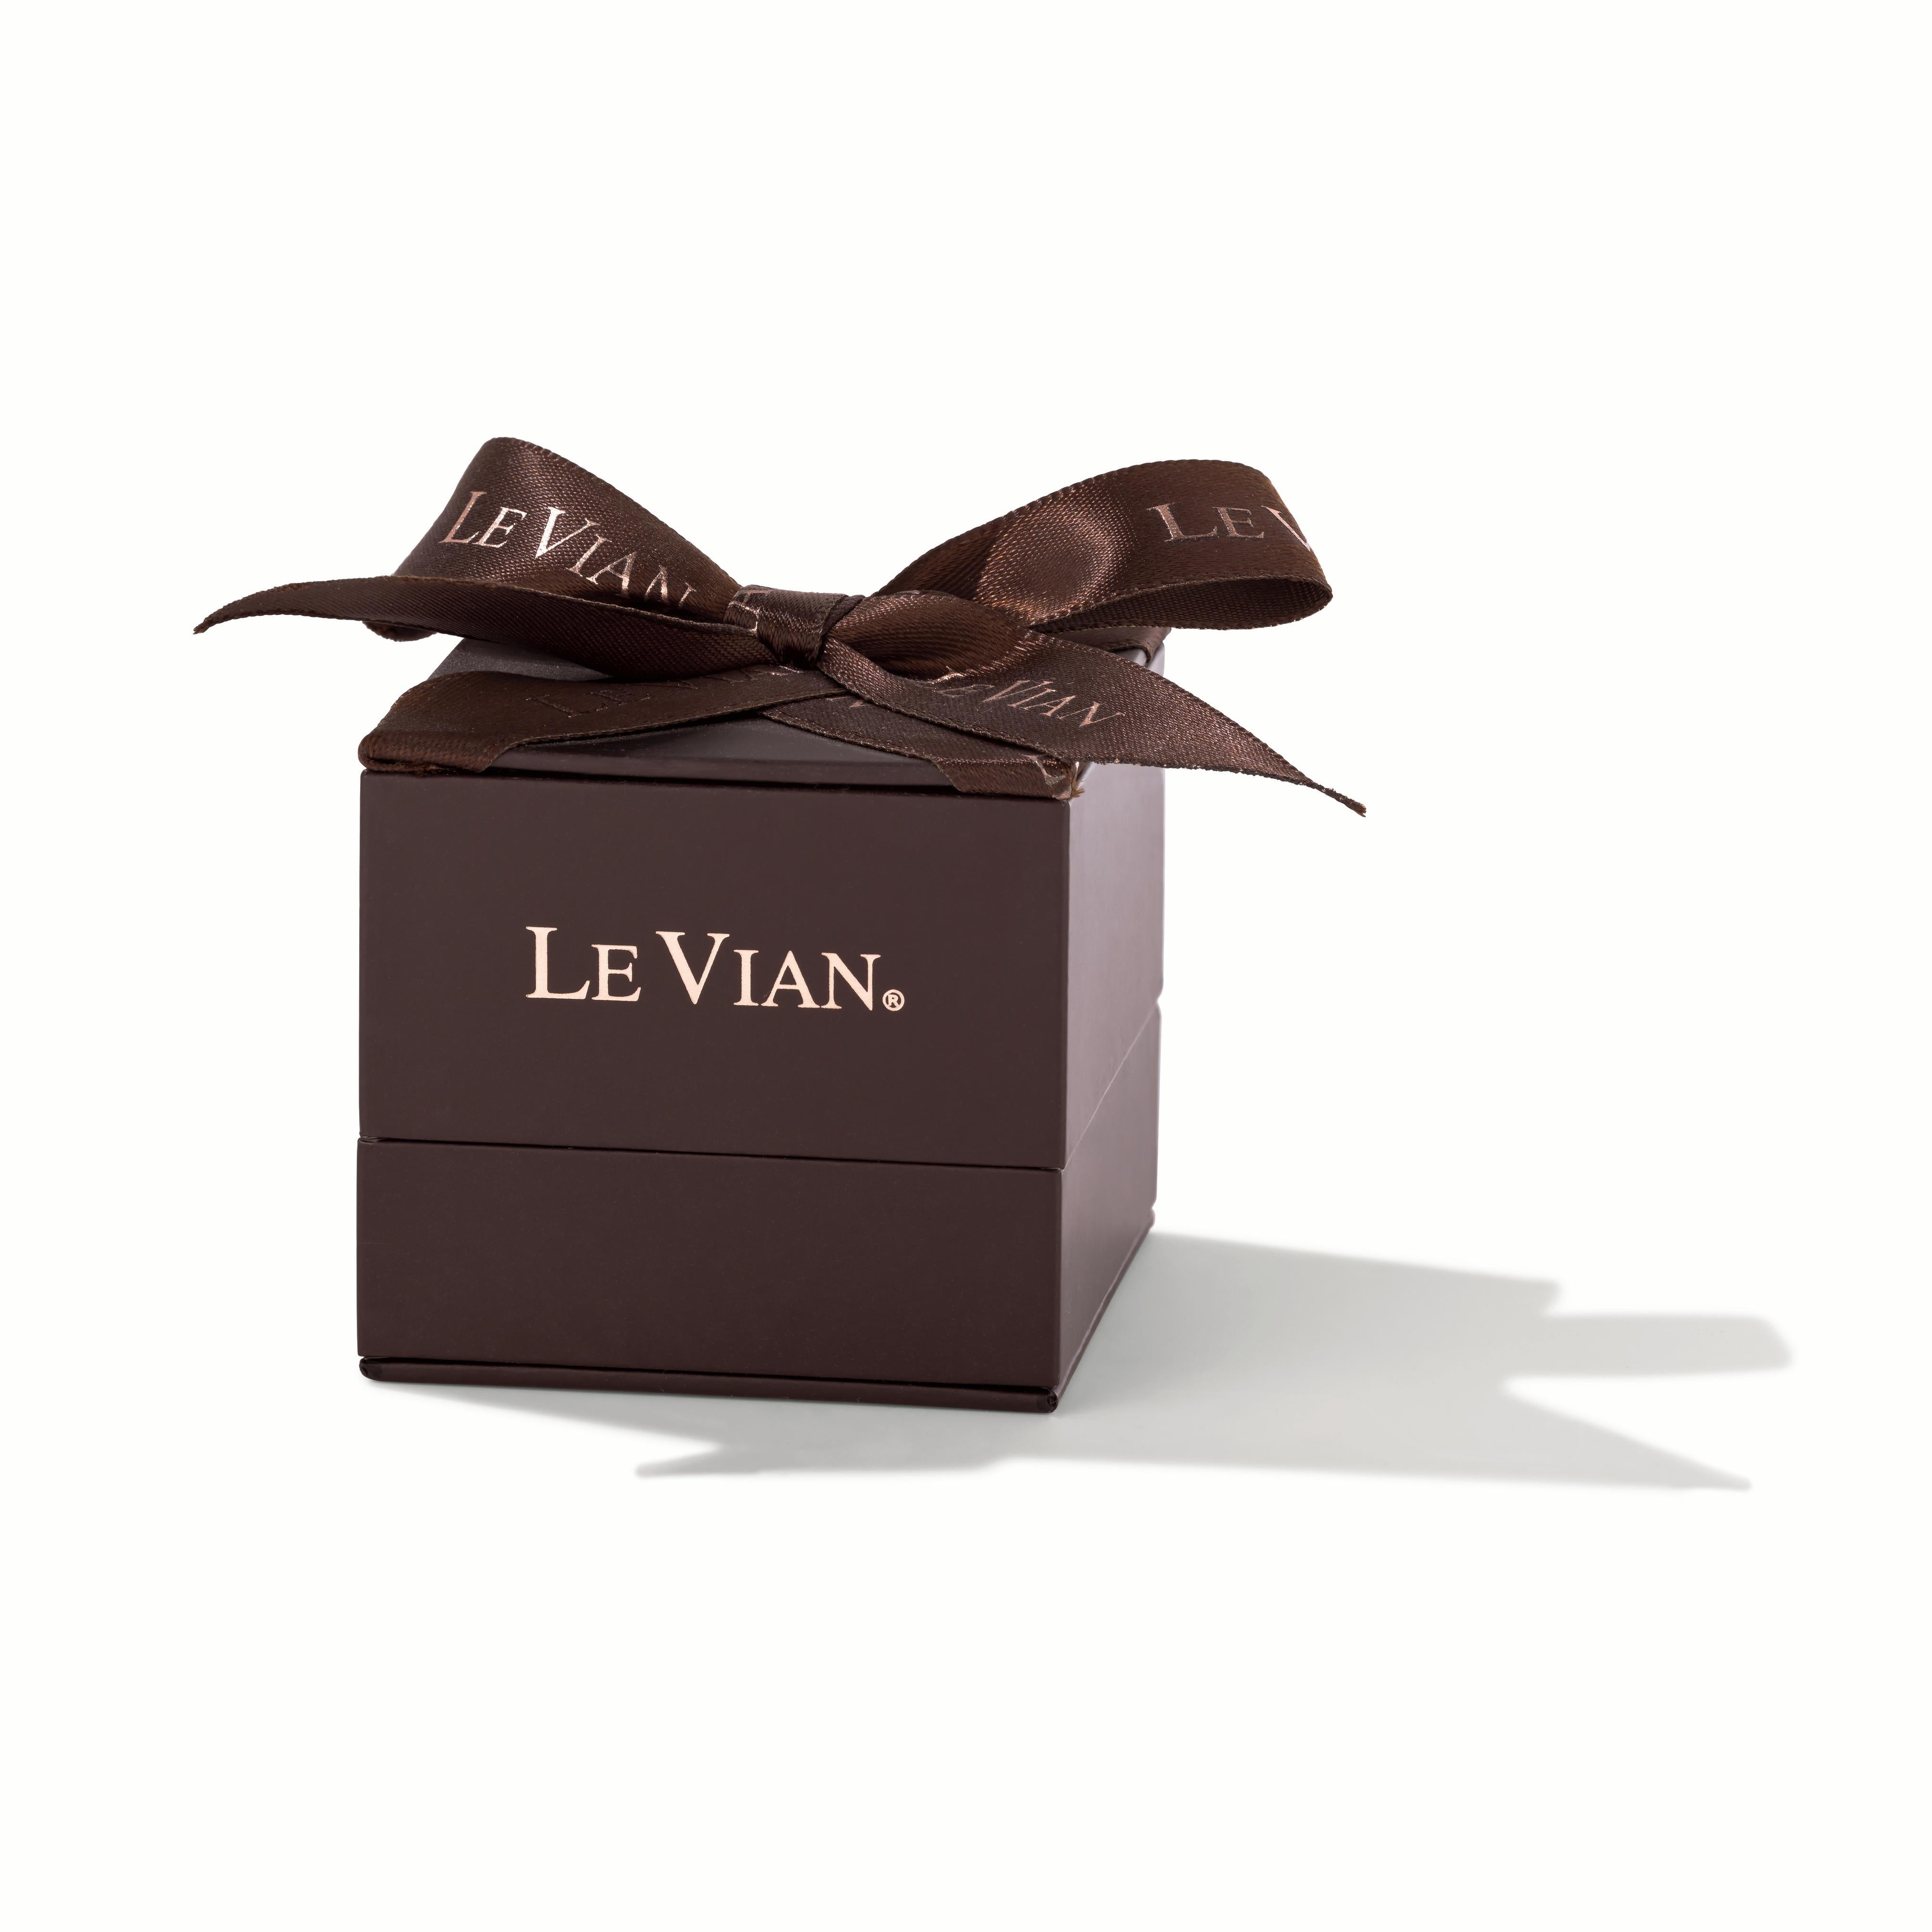 Le Vian Exotics® Pendant featuring 1/8 cts. - Diamonds, 1/20 cts. Yellow Diamonds, 1/4 cts. Blue Diamonds, 1/10 cts. Vanilla Diamonds® set in 14K Honey Gold™

Item comes with a Le Vian® jewelry box as well as a Le Vian® suede pouch!